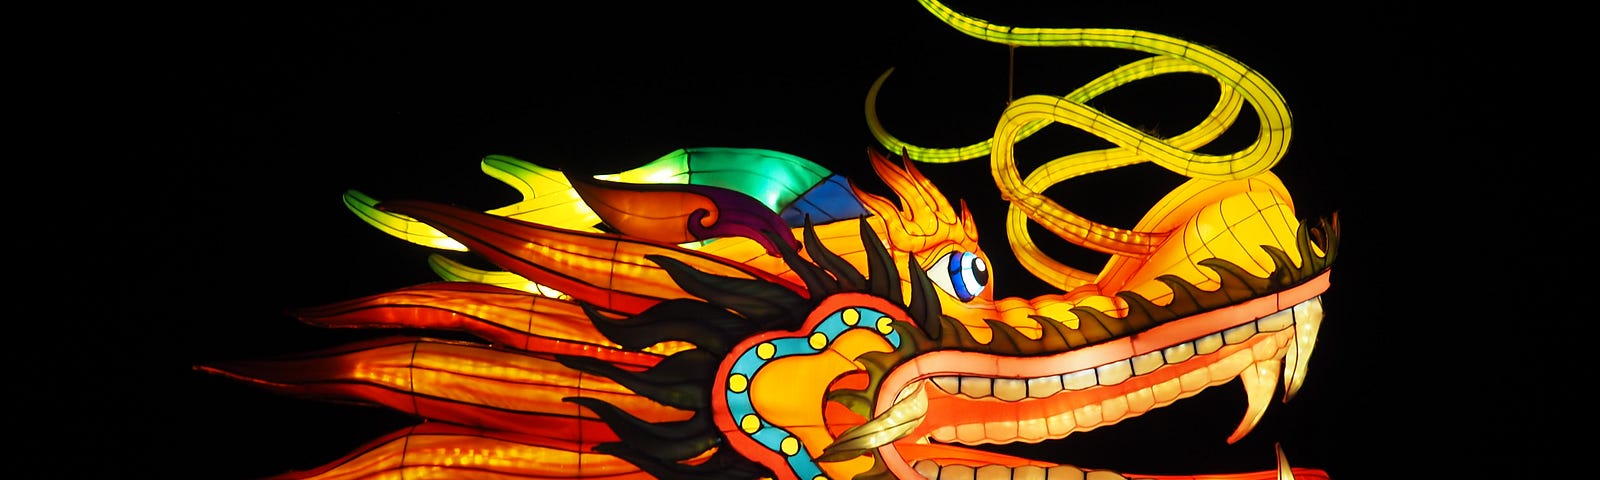 Large puppet dragon from parade lit from within against dark sky.